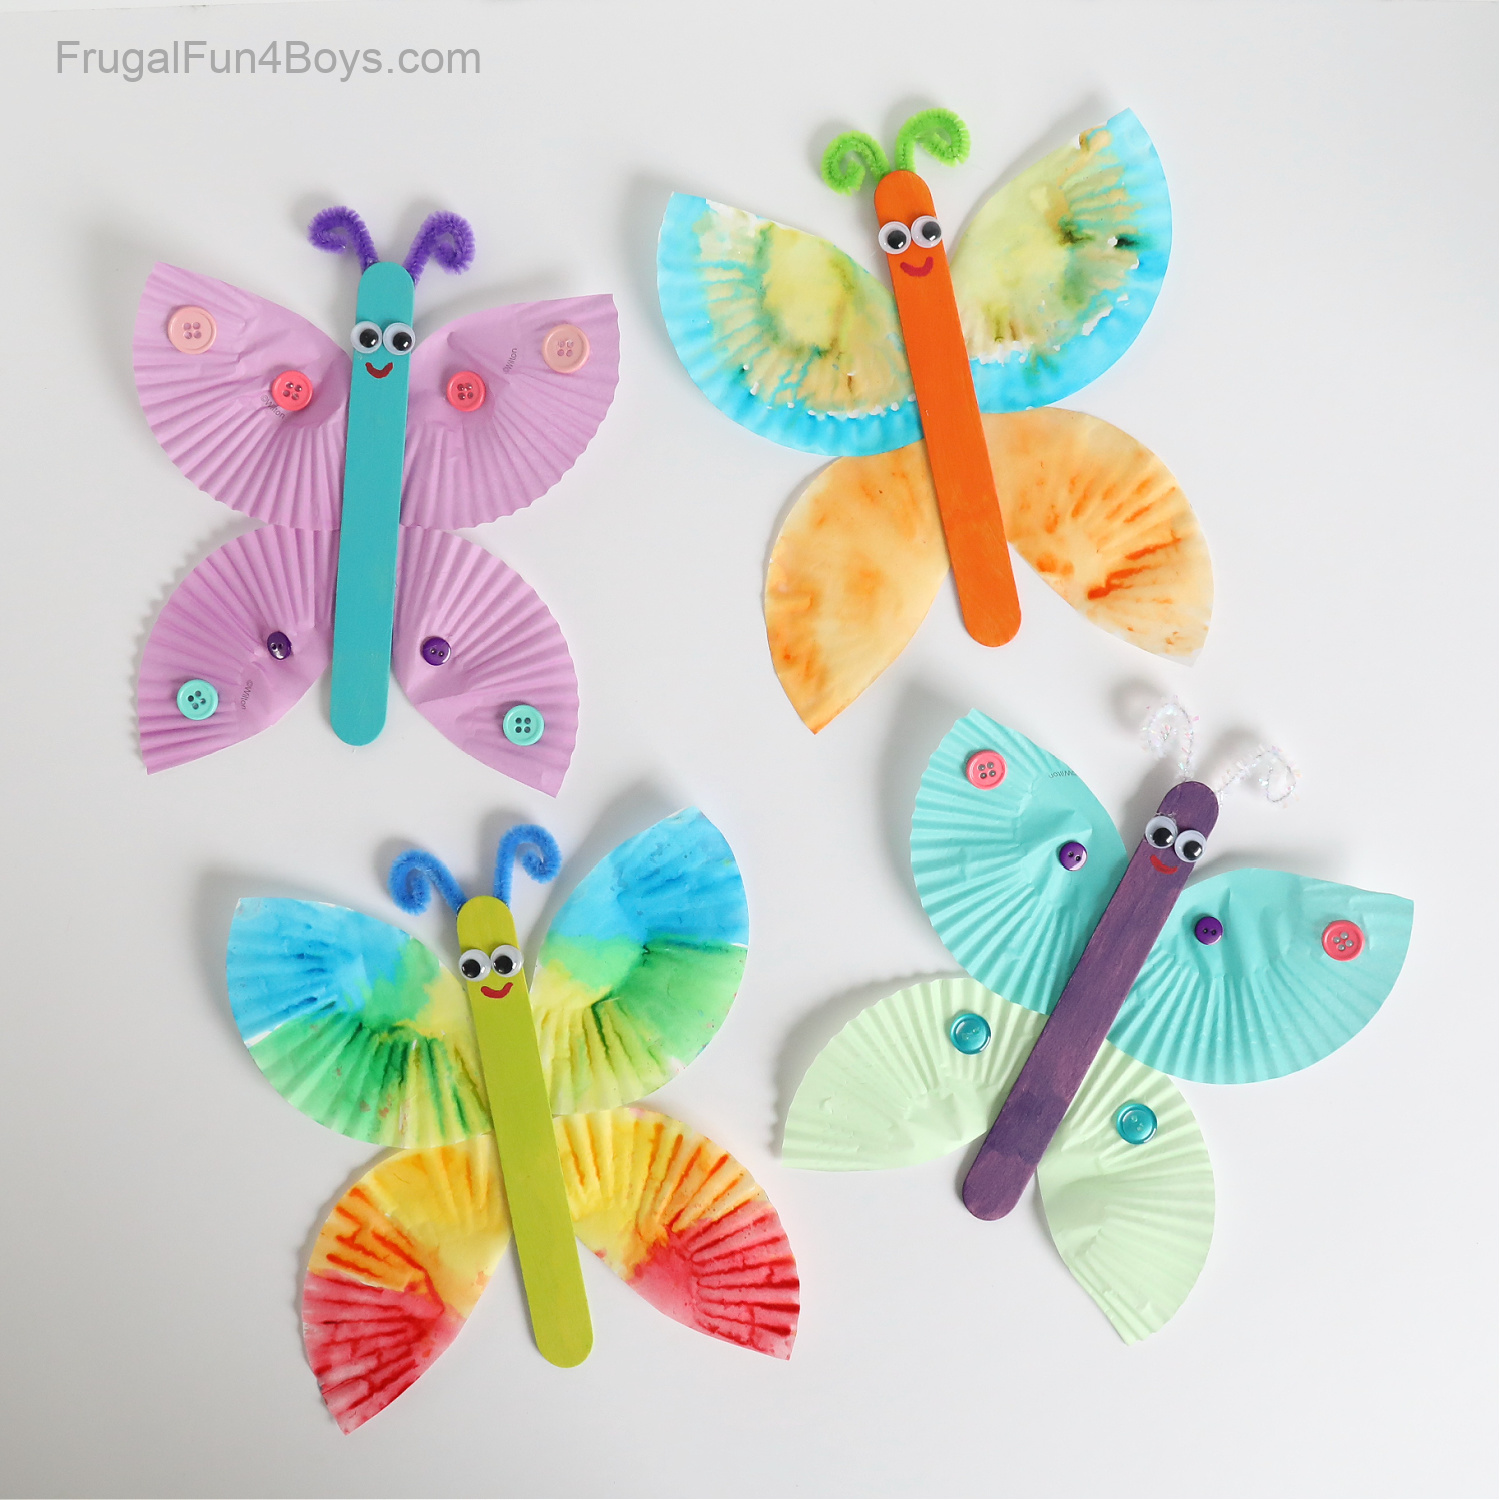 Cupcake Liner Butterfly Craft